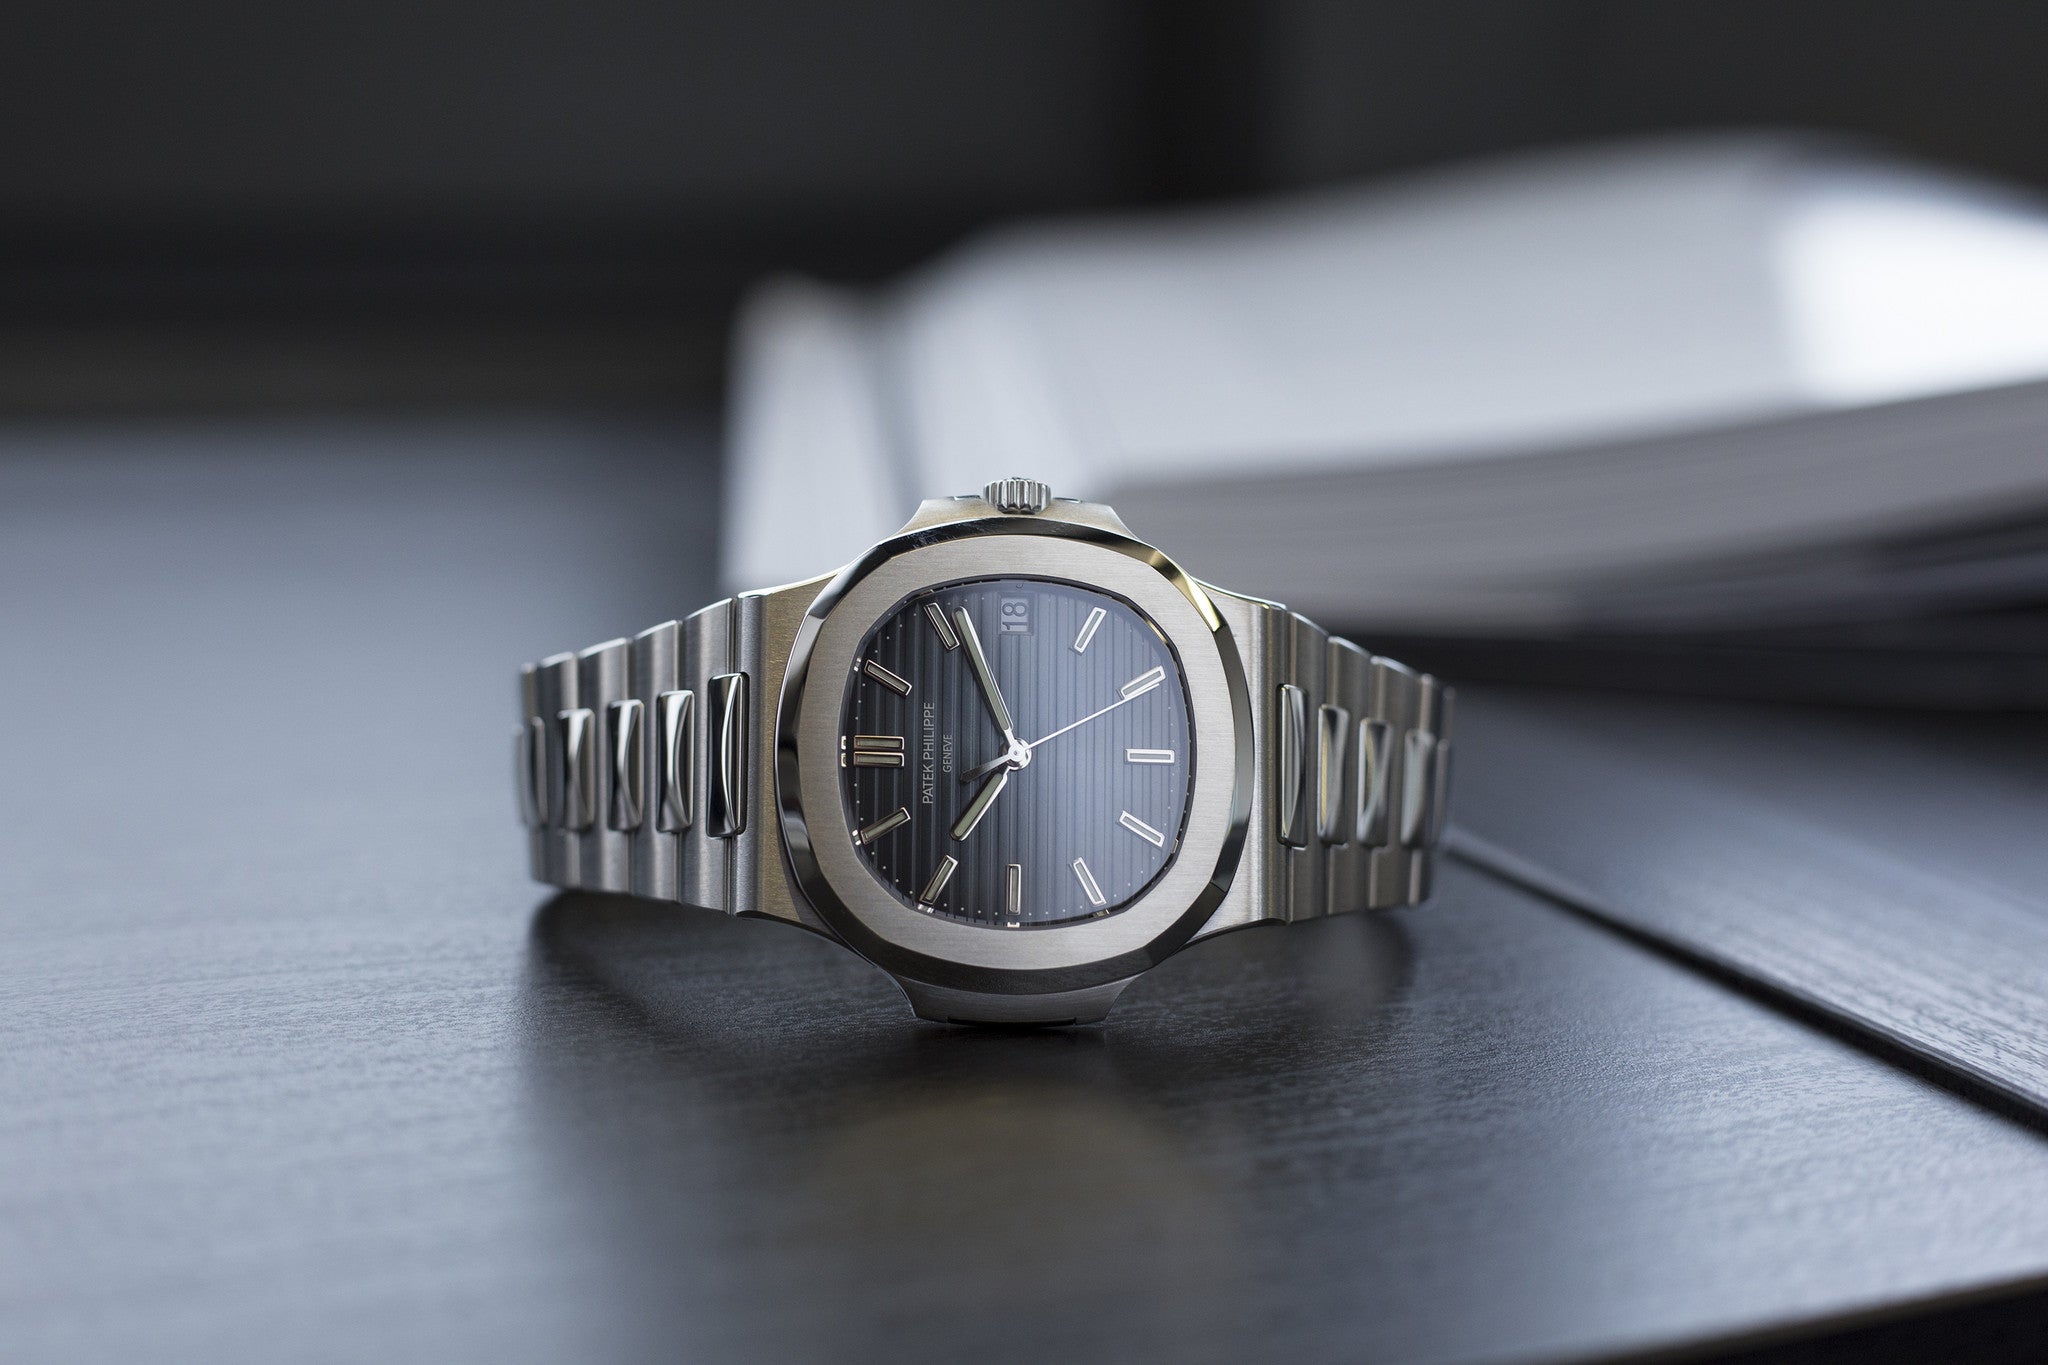 PATEK PHILIPPE NAUTILUS 5711/1A-010 IN STAINLESS STEEL BLUE DIAL